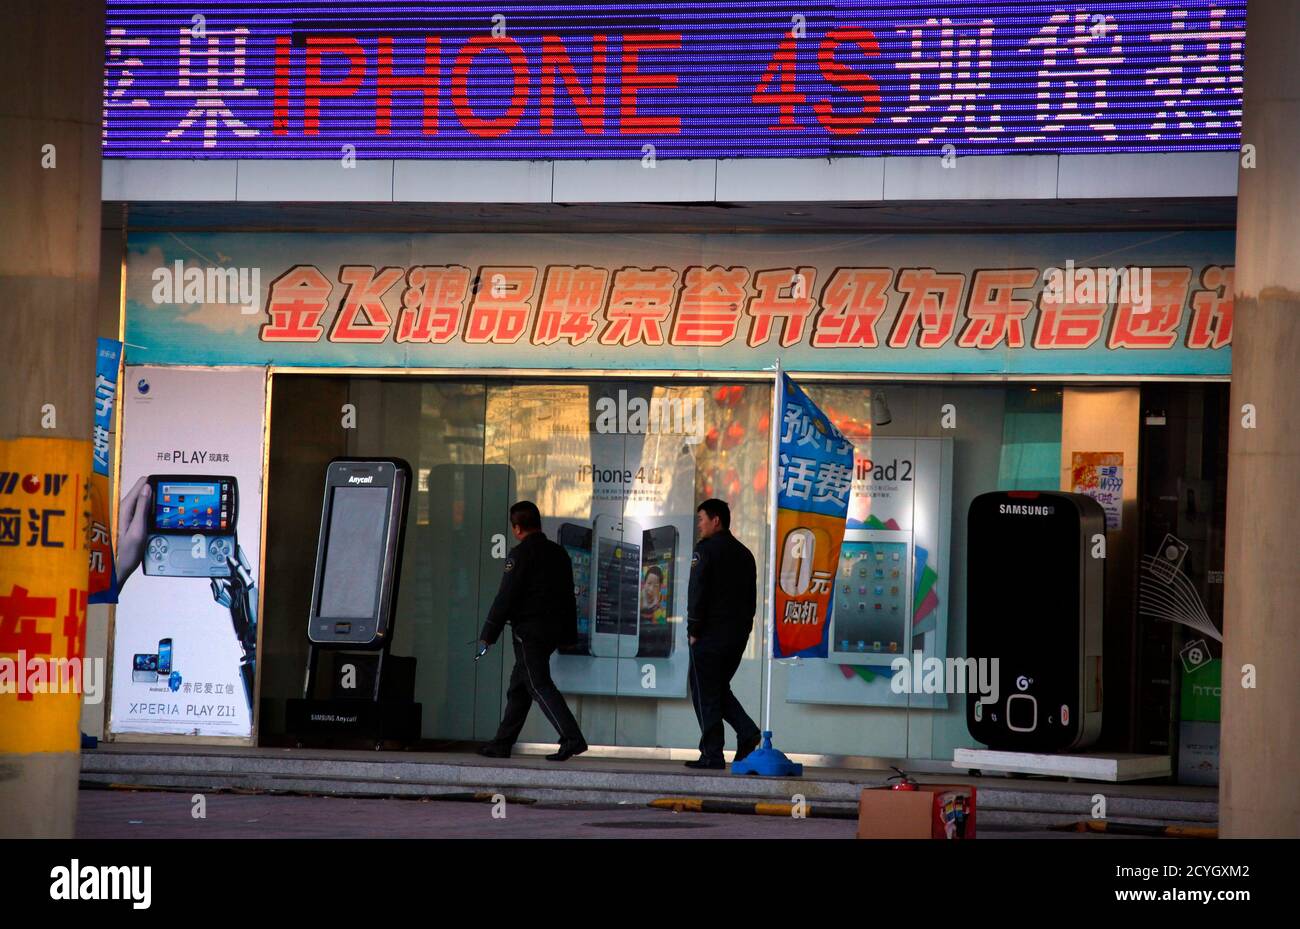 Two security guards walk past an electronics store advertising Apple's  iPhone 4S and iPad2, as well as other phones and hand-held devices, in  central Beijing January 25, 2012. Apple said in a